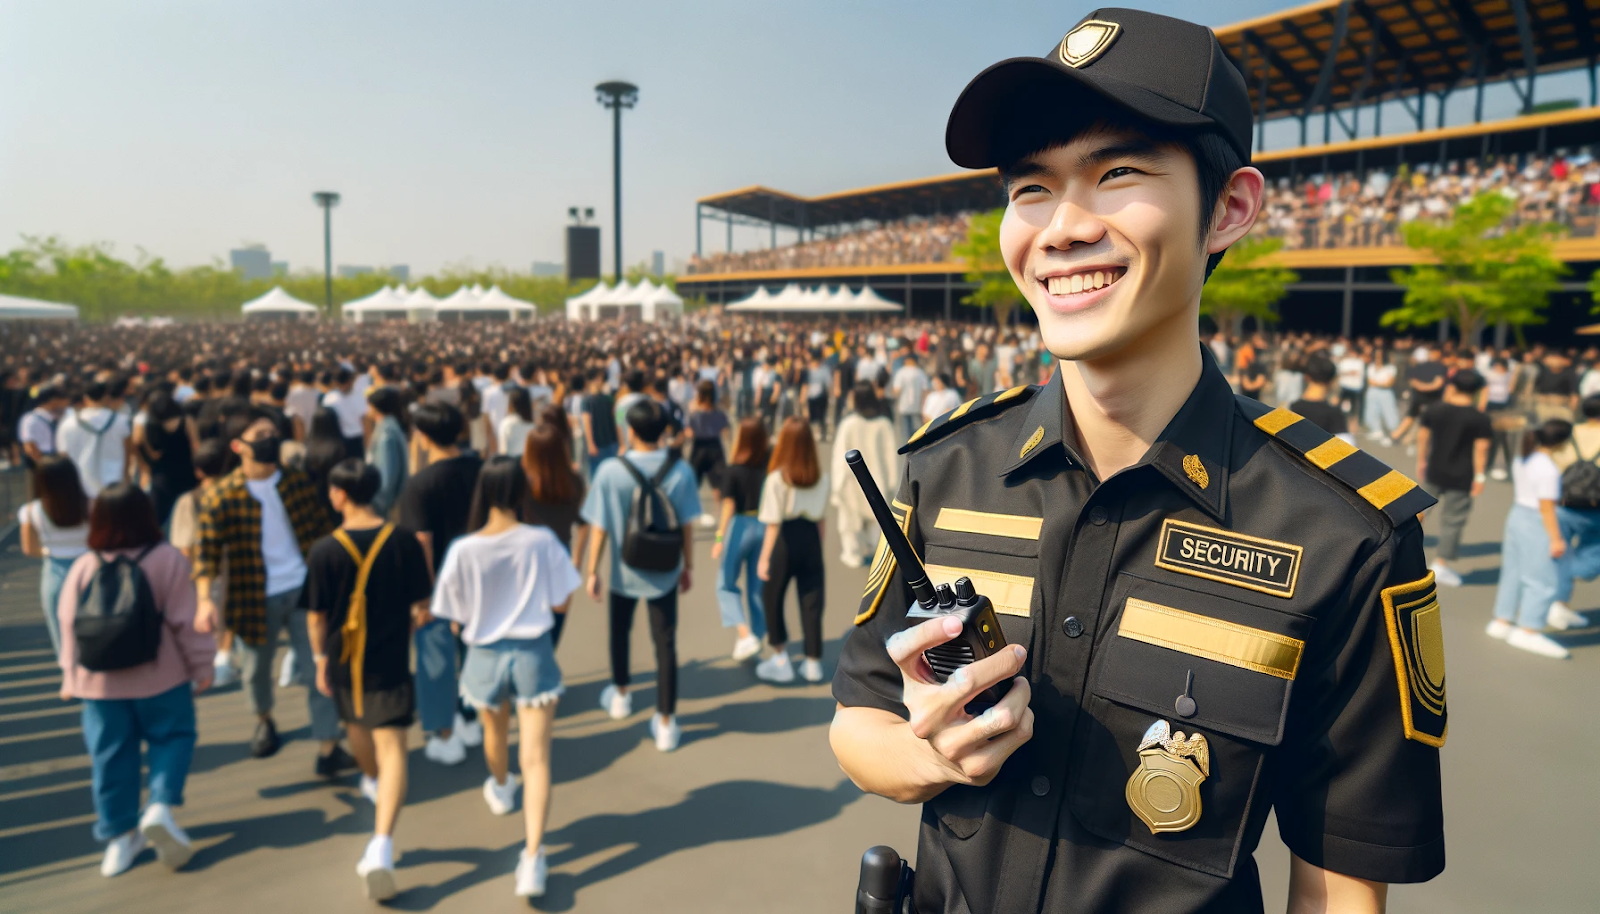 Smiling security officer ensures safety at a large outdoor event, surrounded by a crowd of attendees under a clear sky, highlighting effective event security management.